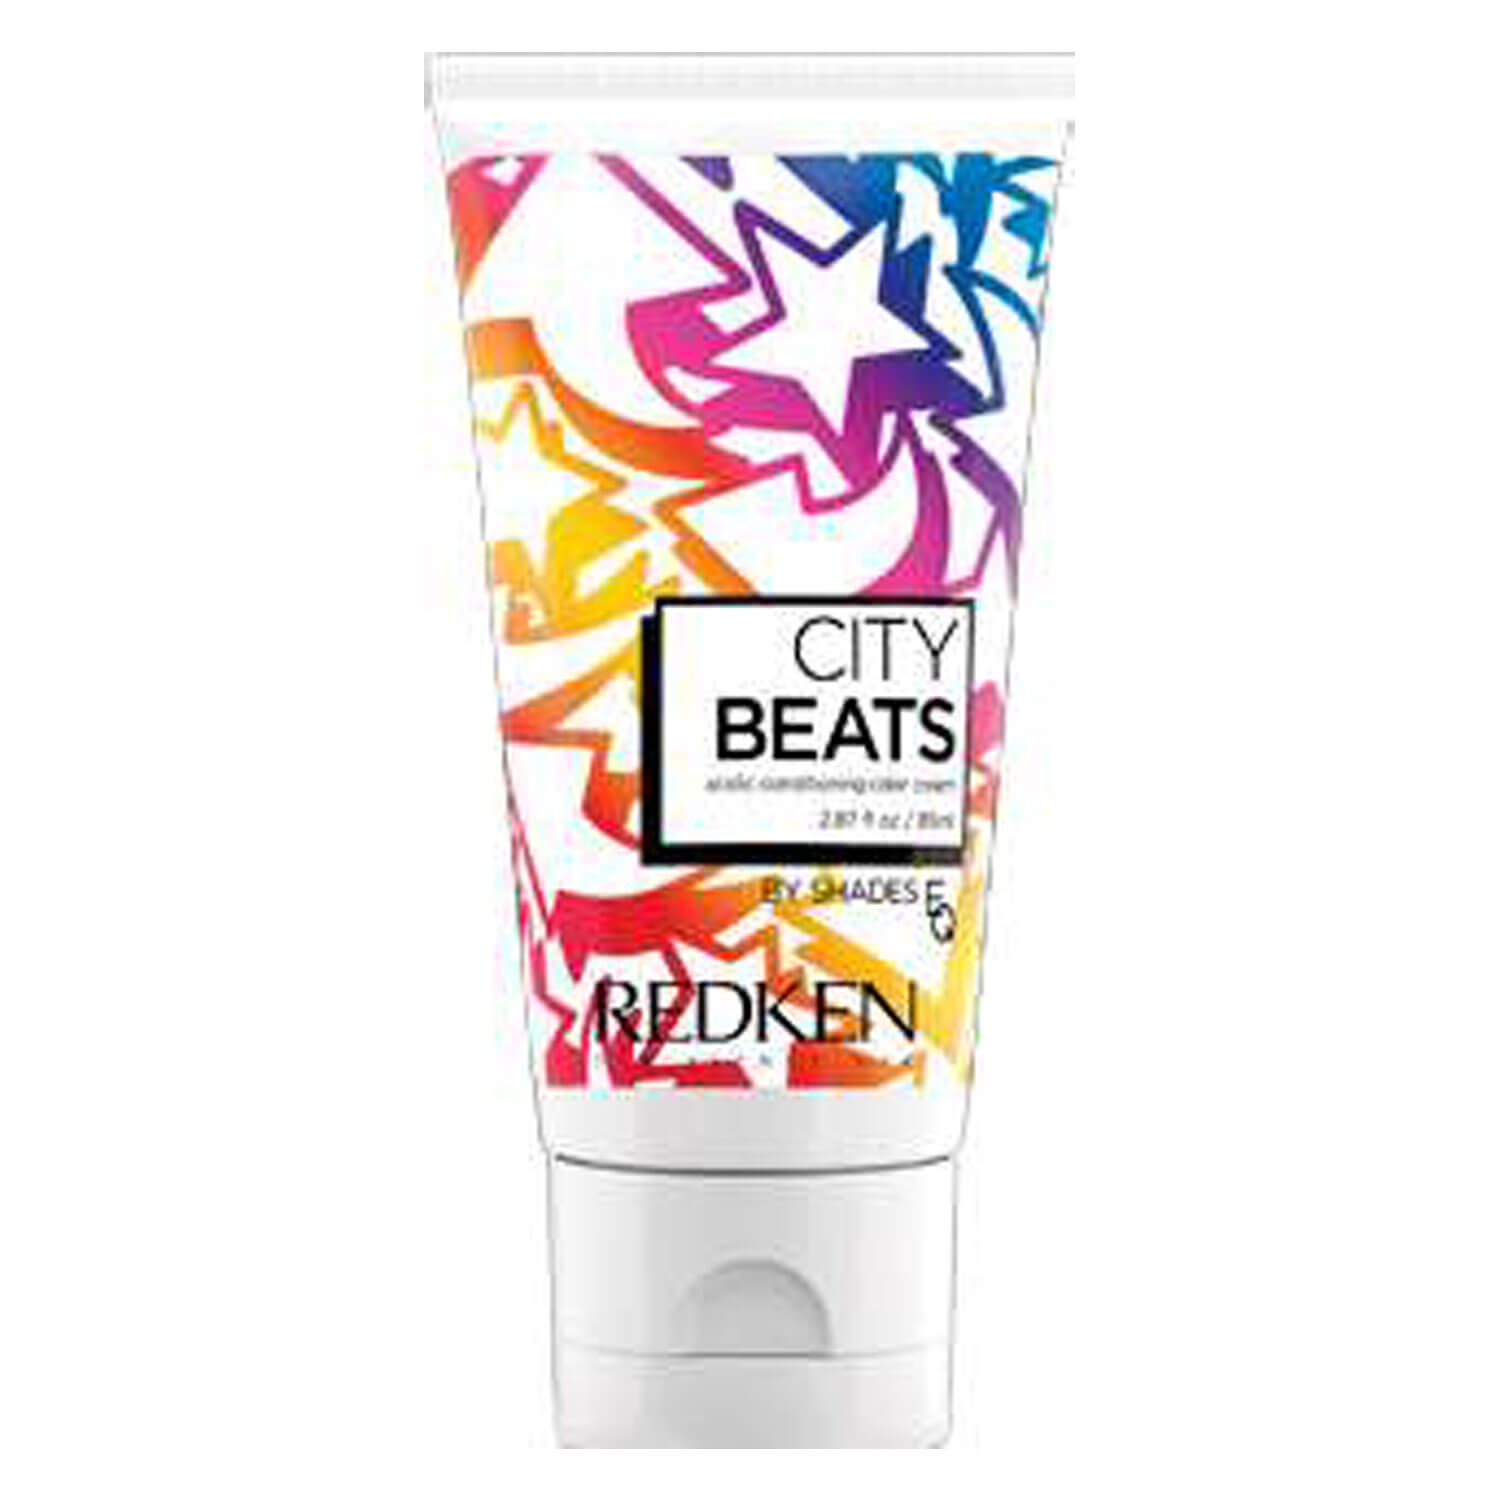 Product image from City Beats - City Beats Clear